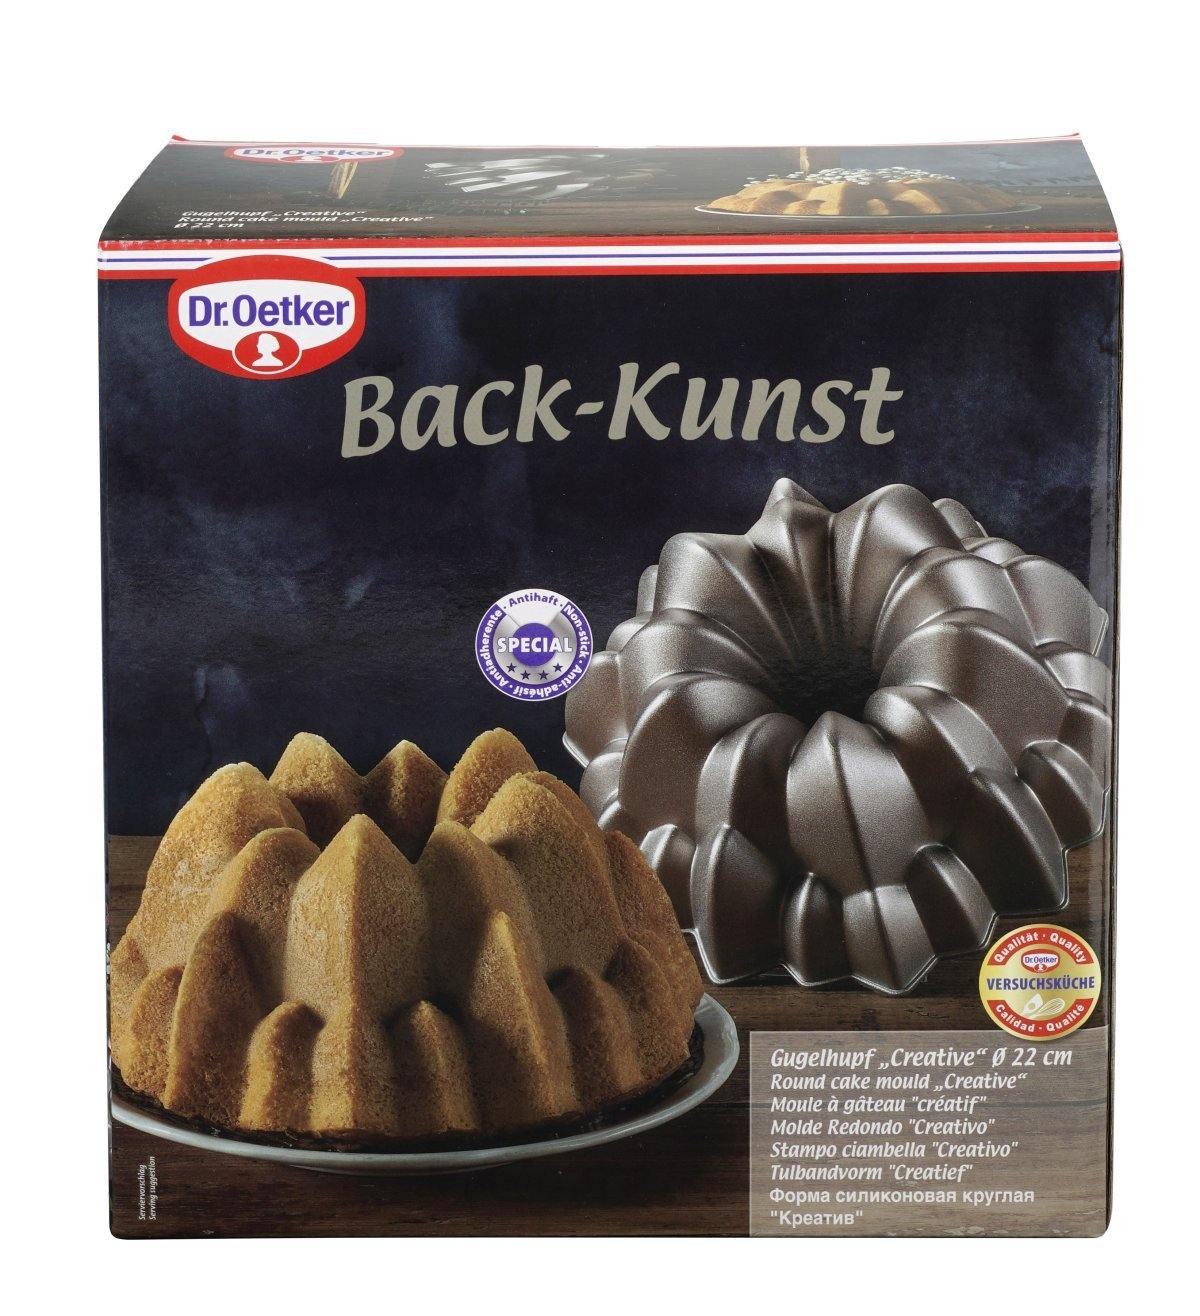 Dr. Oetker  Round Cake Mould "Creative" 22X11 cm - Whole and All